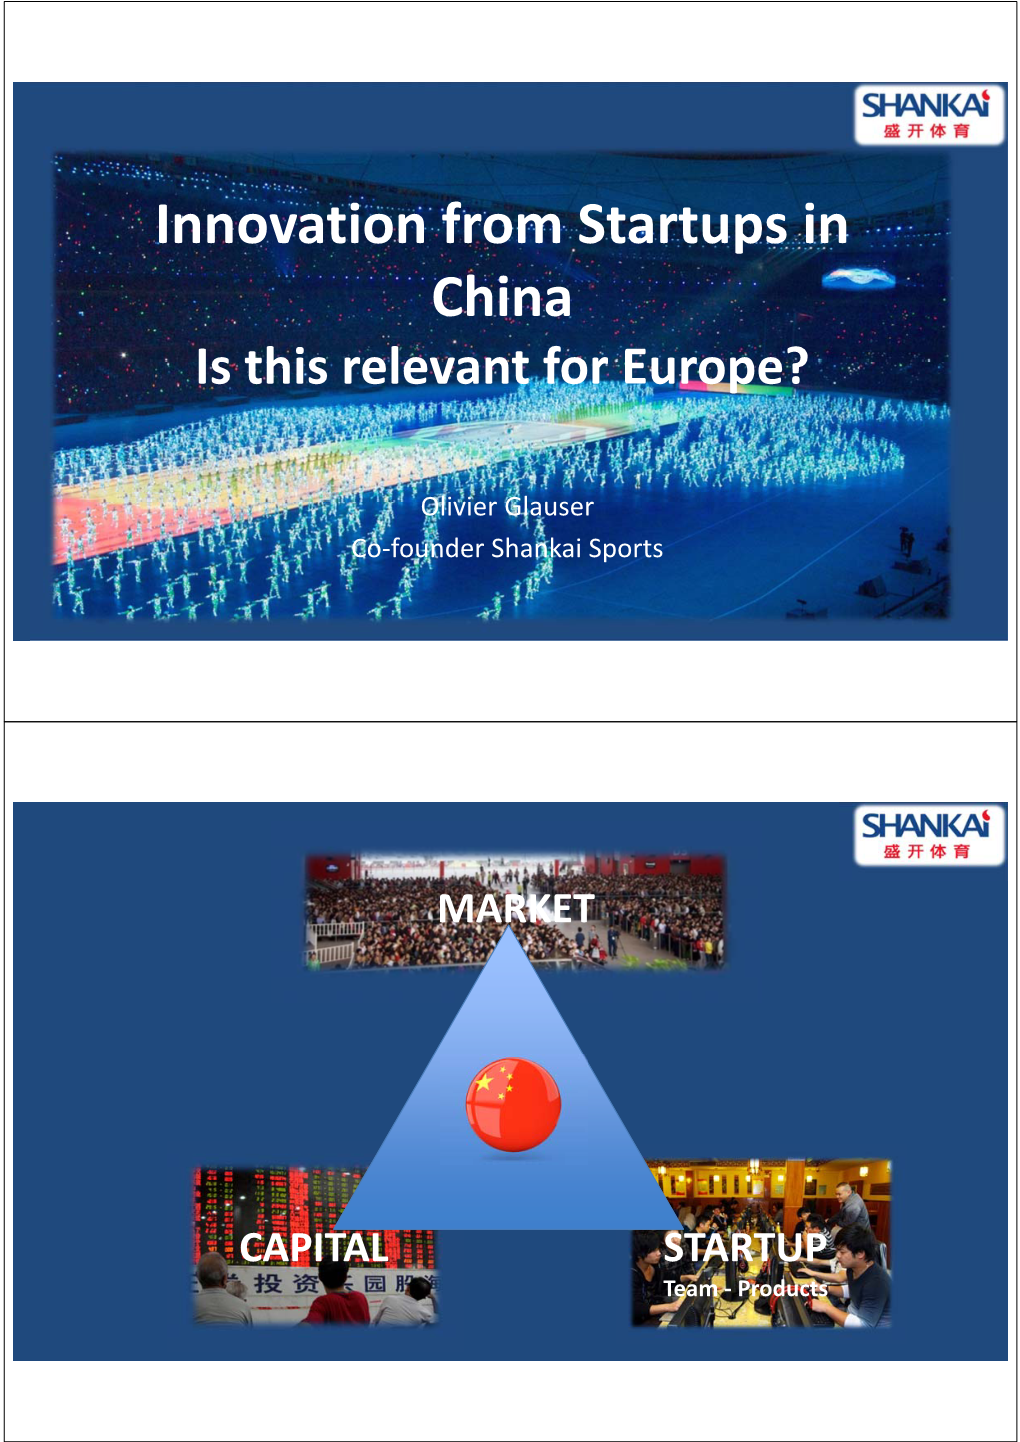 Olivier Glauser, Shankai Sports, Innovation from Startups in China